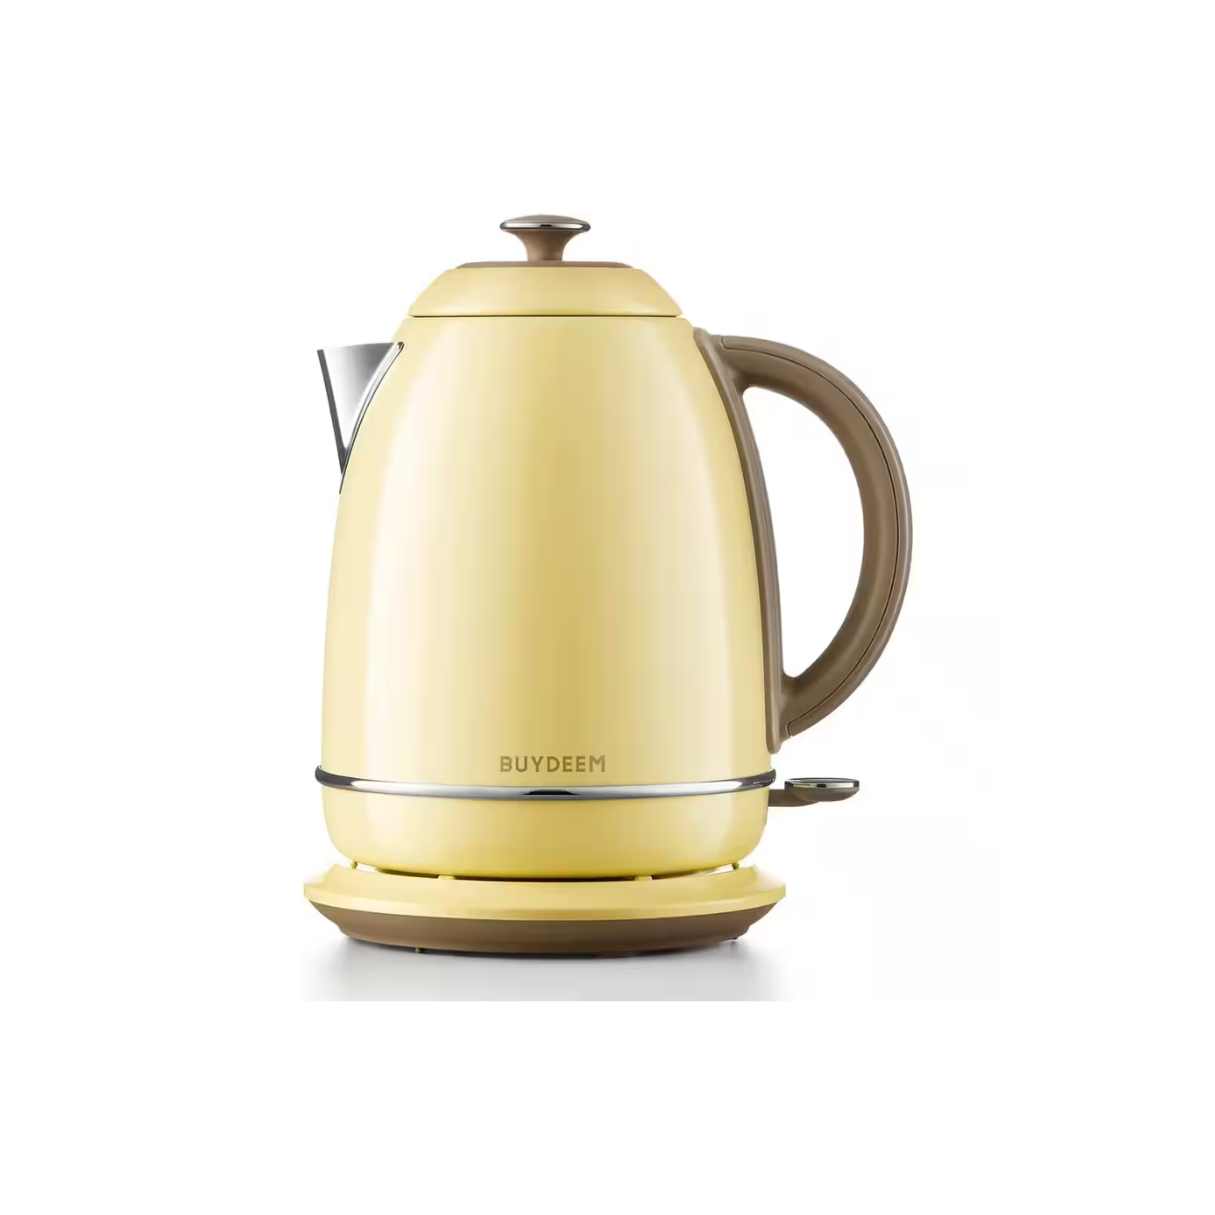 2.3L Electric Kettle Quiet, Double Wall Hot Water Boiler BPA-Free, Quiet  Boil and Cool